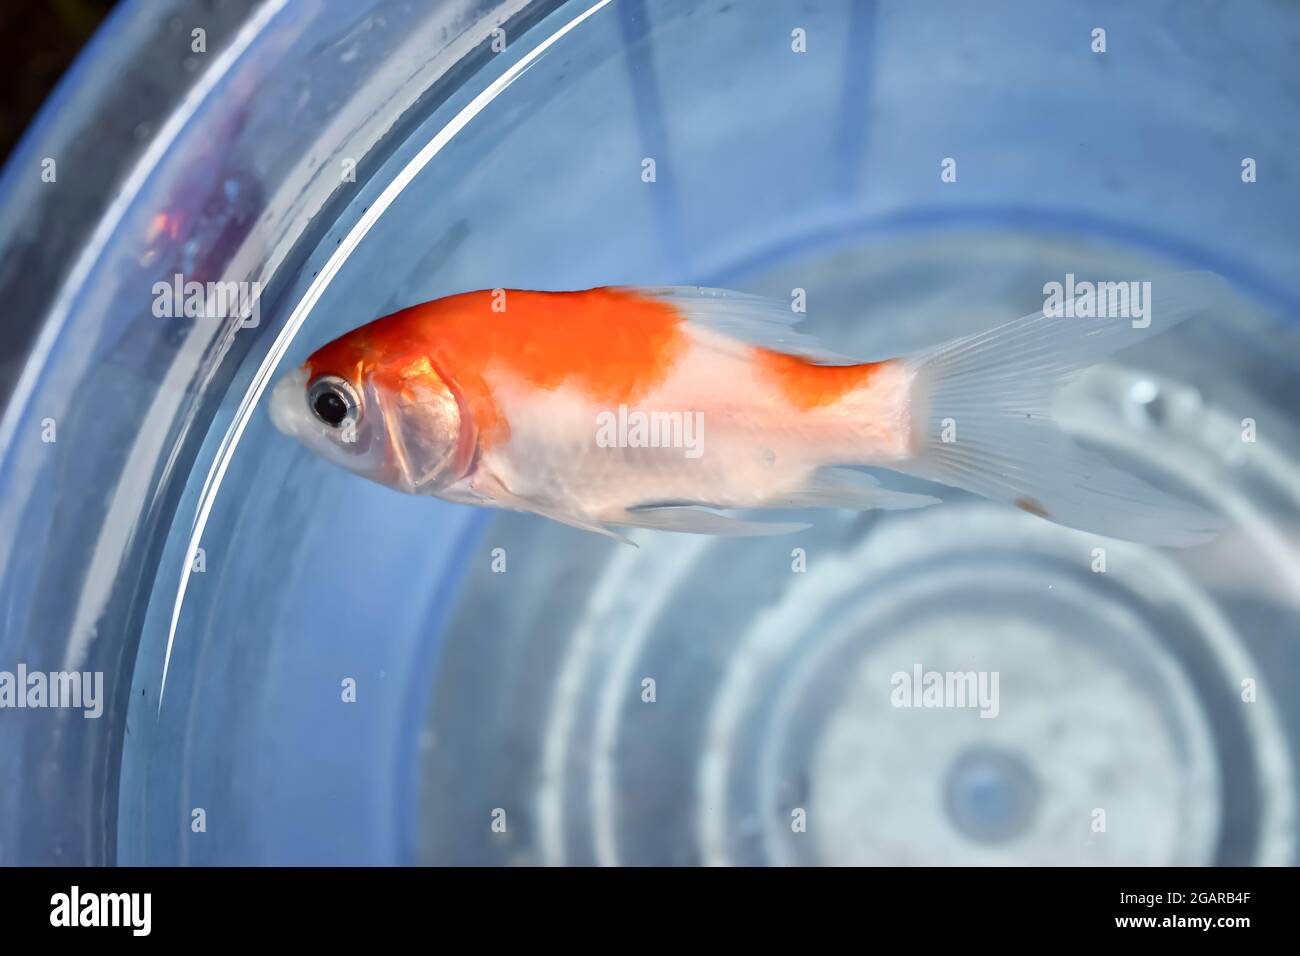 Comet or common goldfish died due to poor water quality i.e. ammonia poisoning. Dead fish floating on the surface of water. Stock Photo